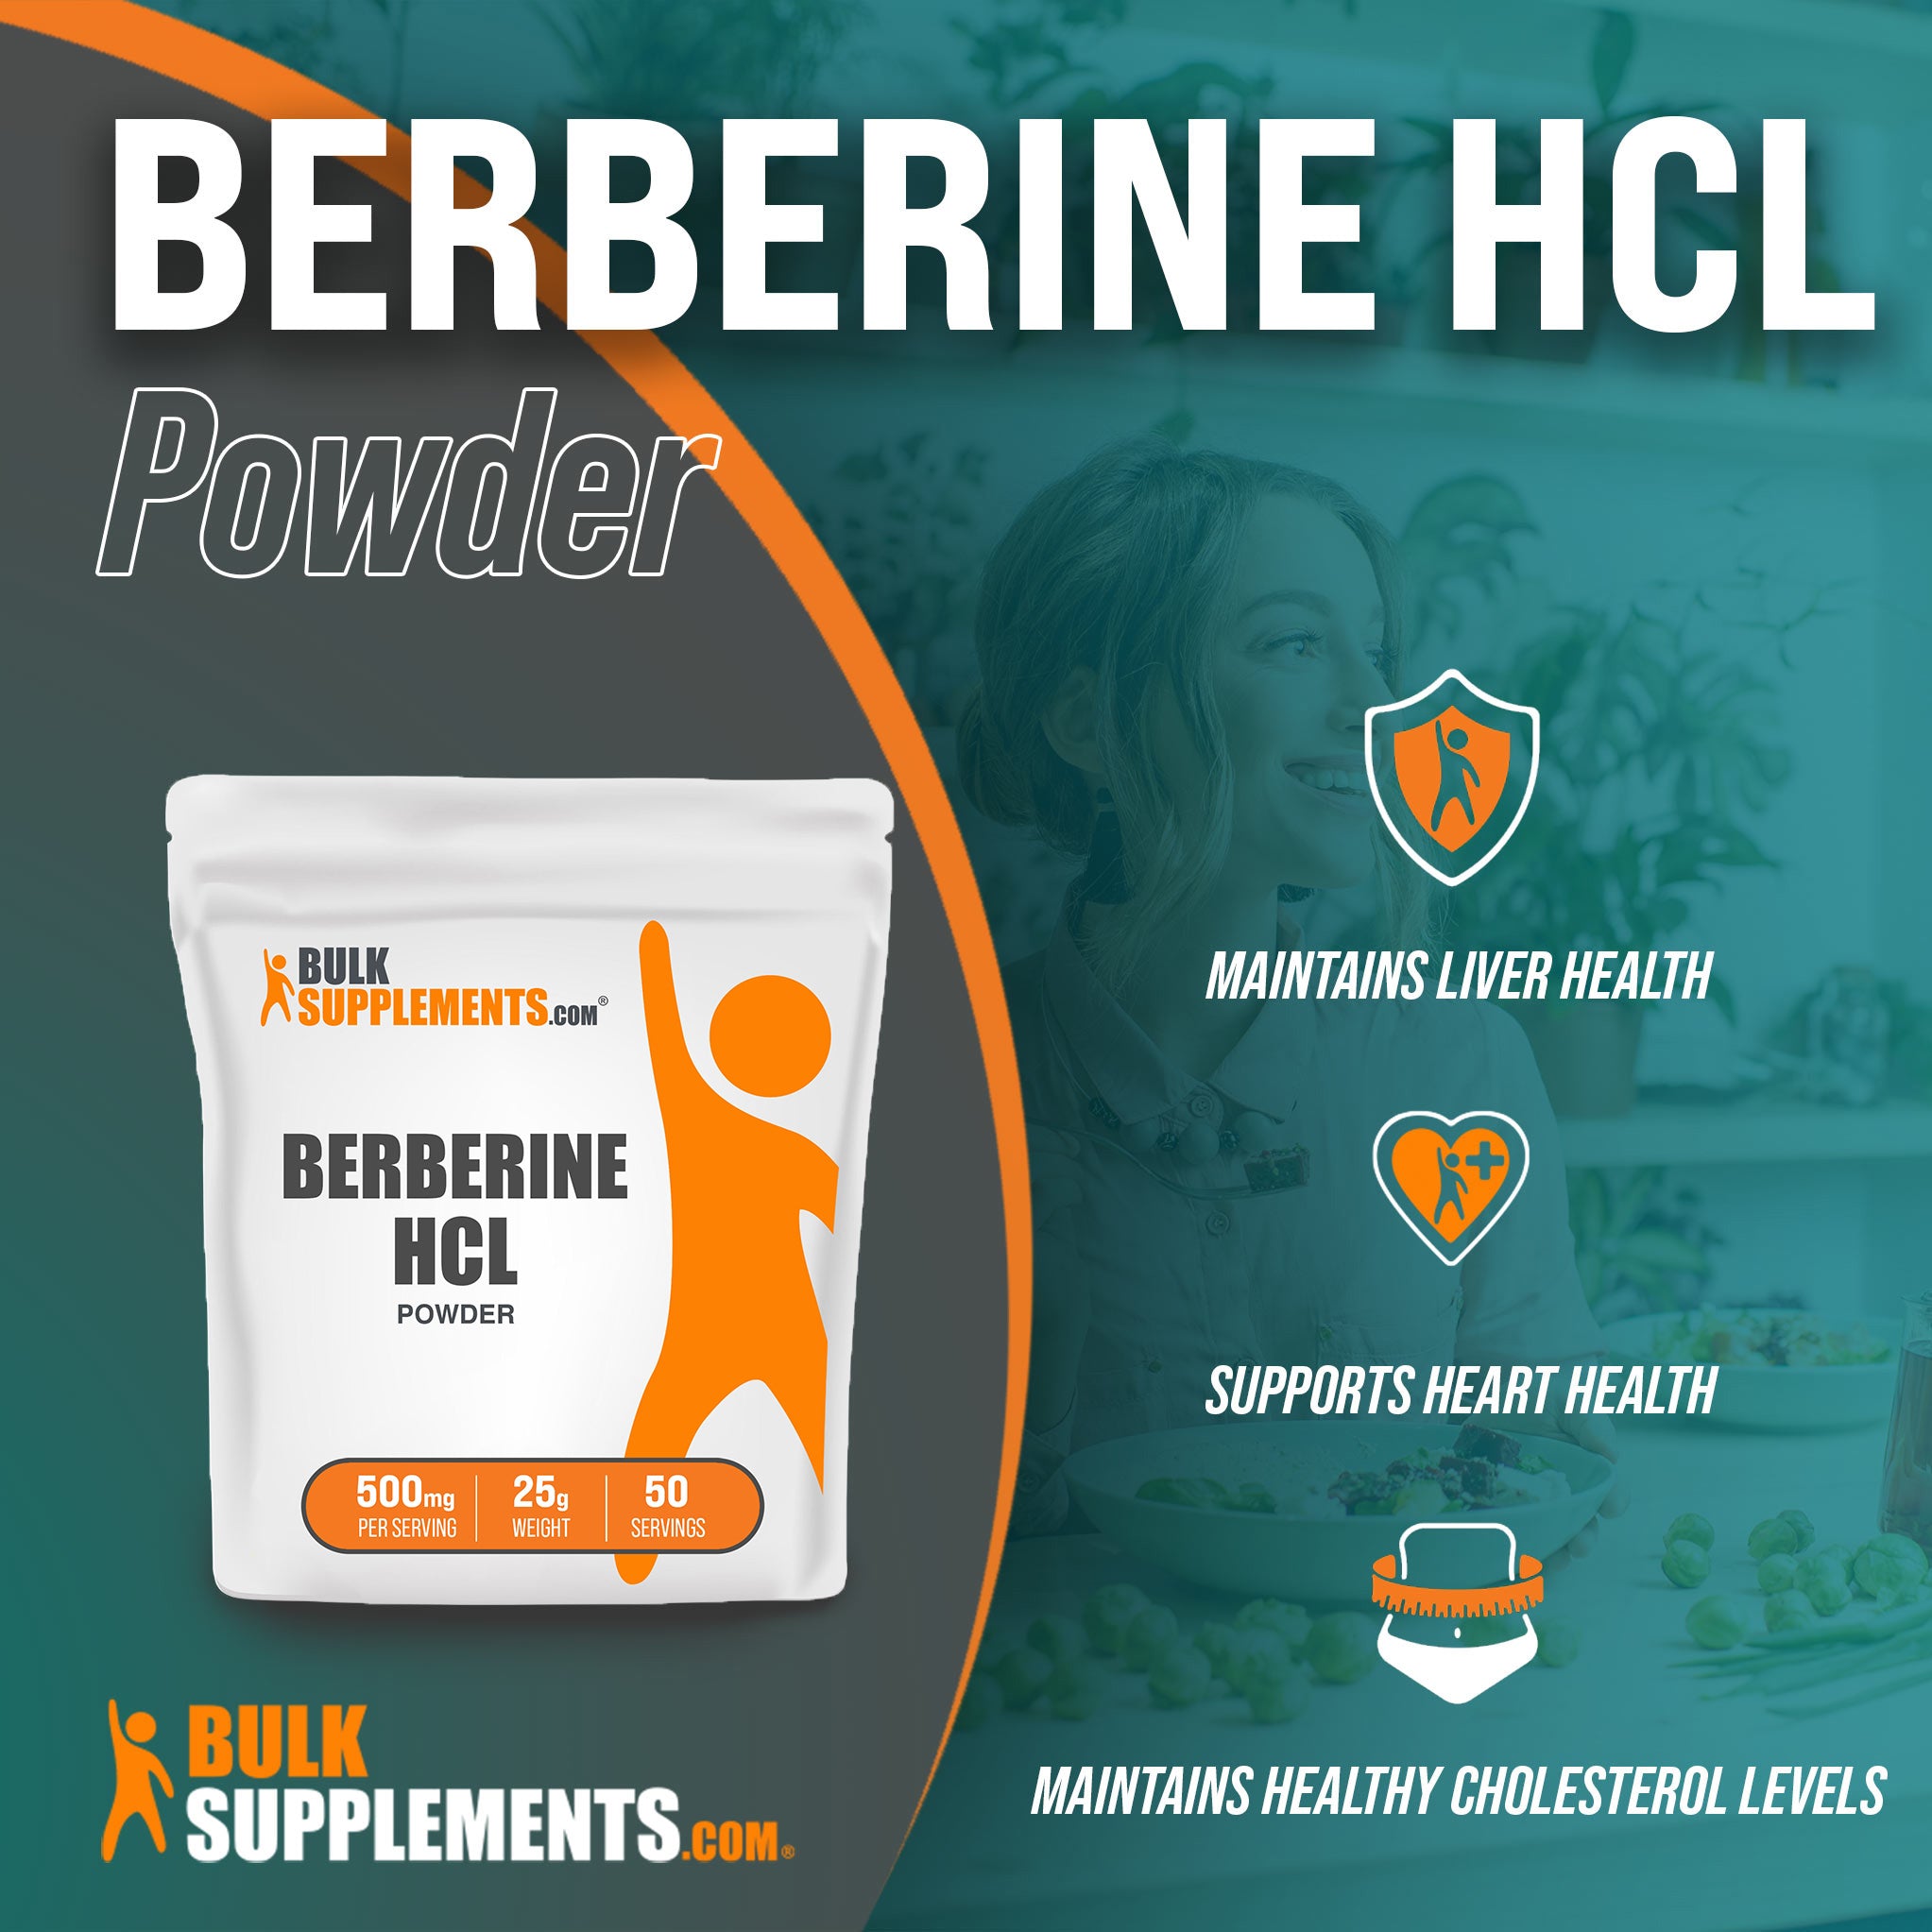 Berberine HCl Powder from Bulk Supplements for Liver and Heart Health